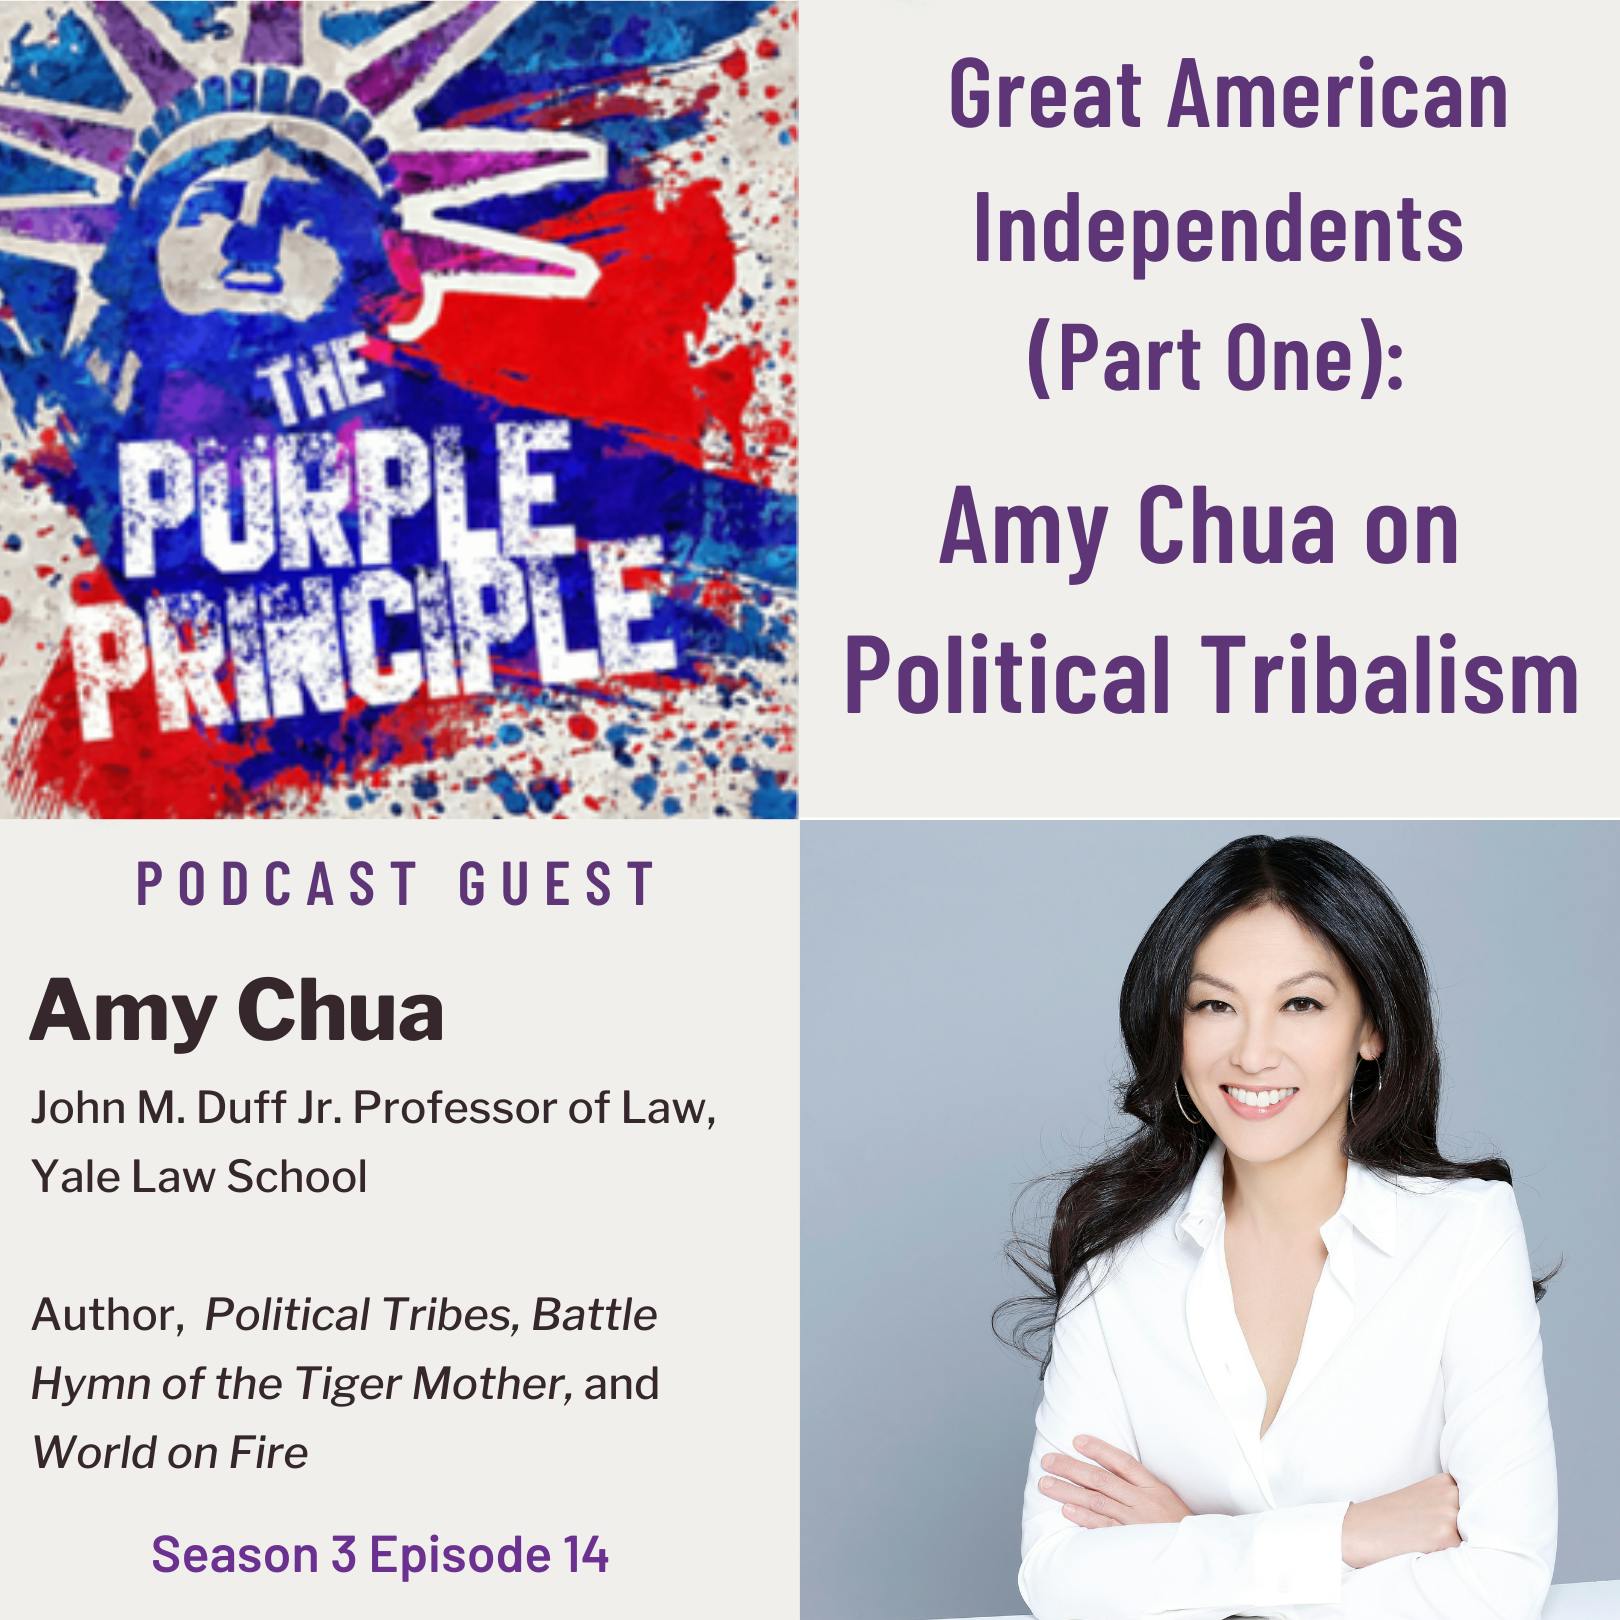 Great American Independents (Part One): Amy Chua on Political Tribalism